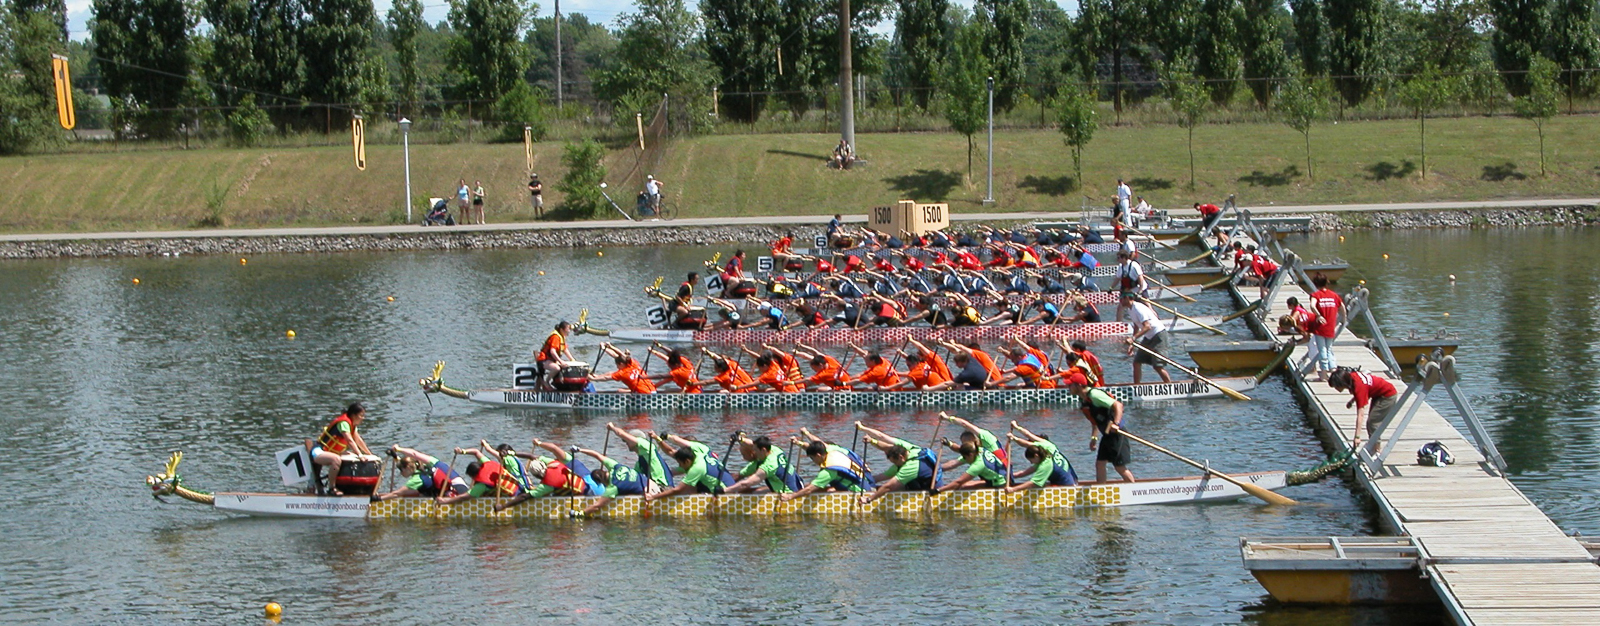 Dragon boat racers in the race ready position. Courtesy of Arlene Chan.